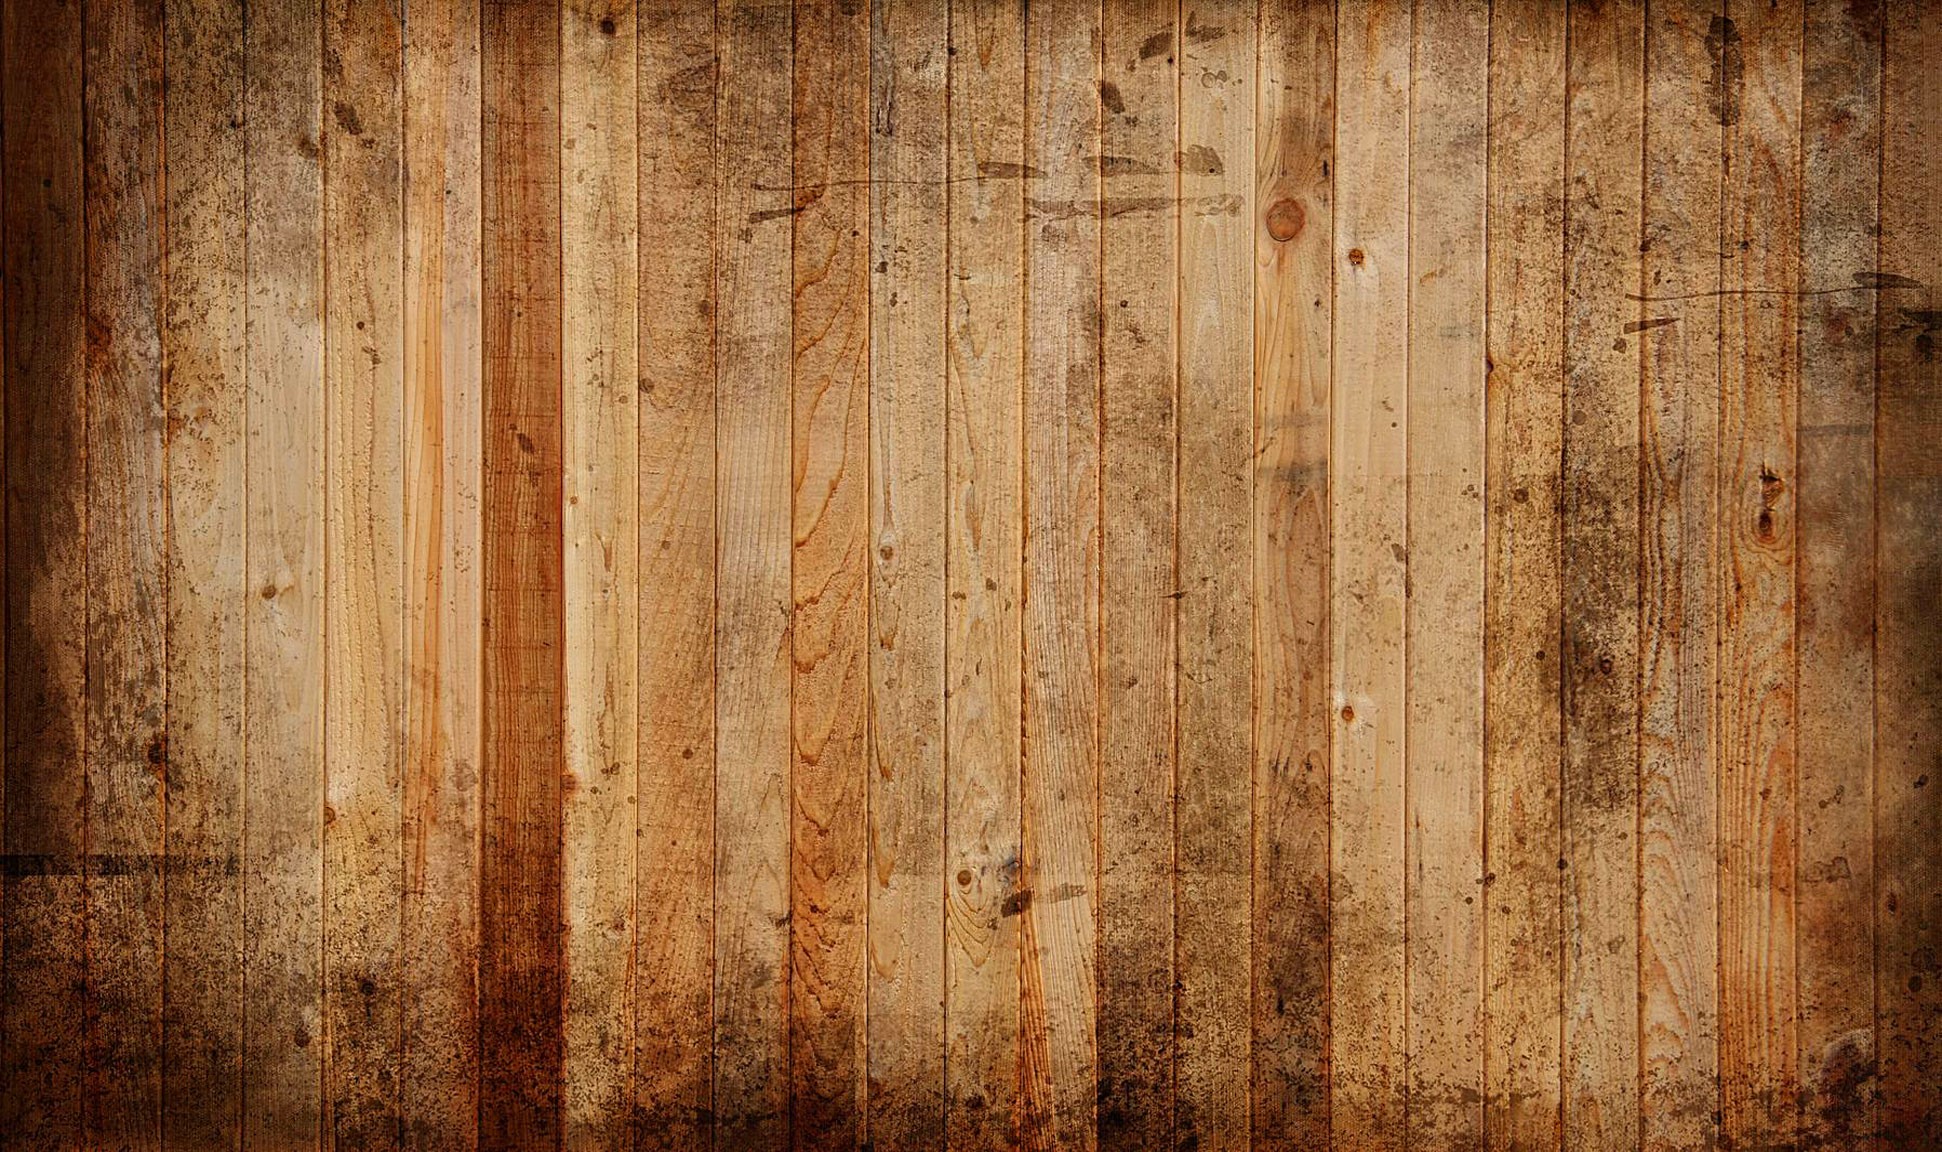 Rustic background ·① Download free awesome wallpapers for desktop and